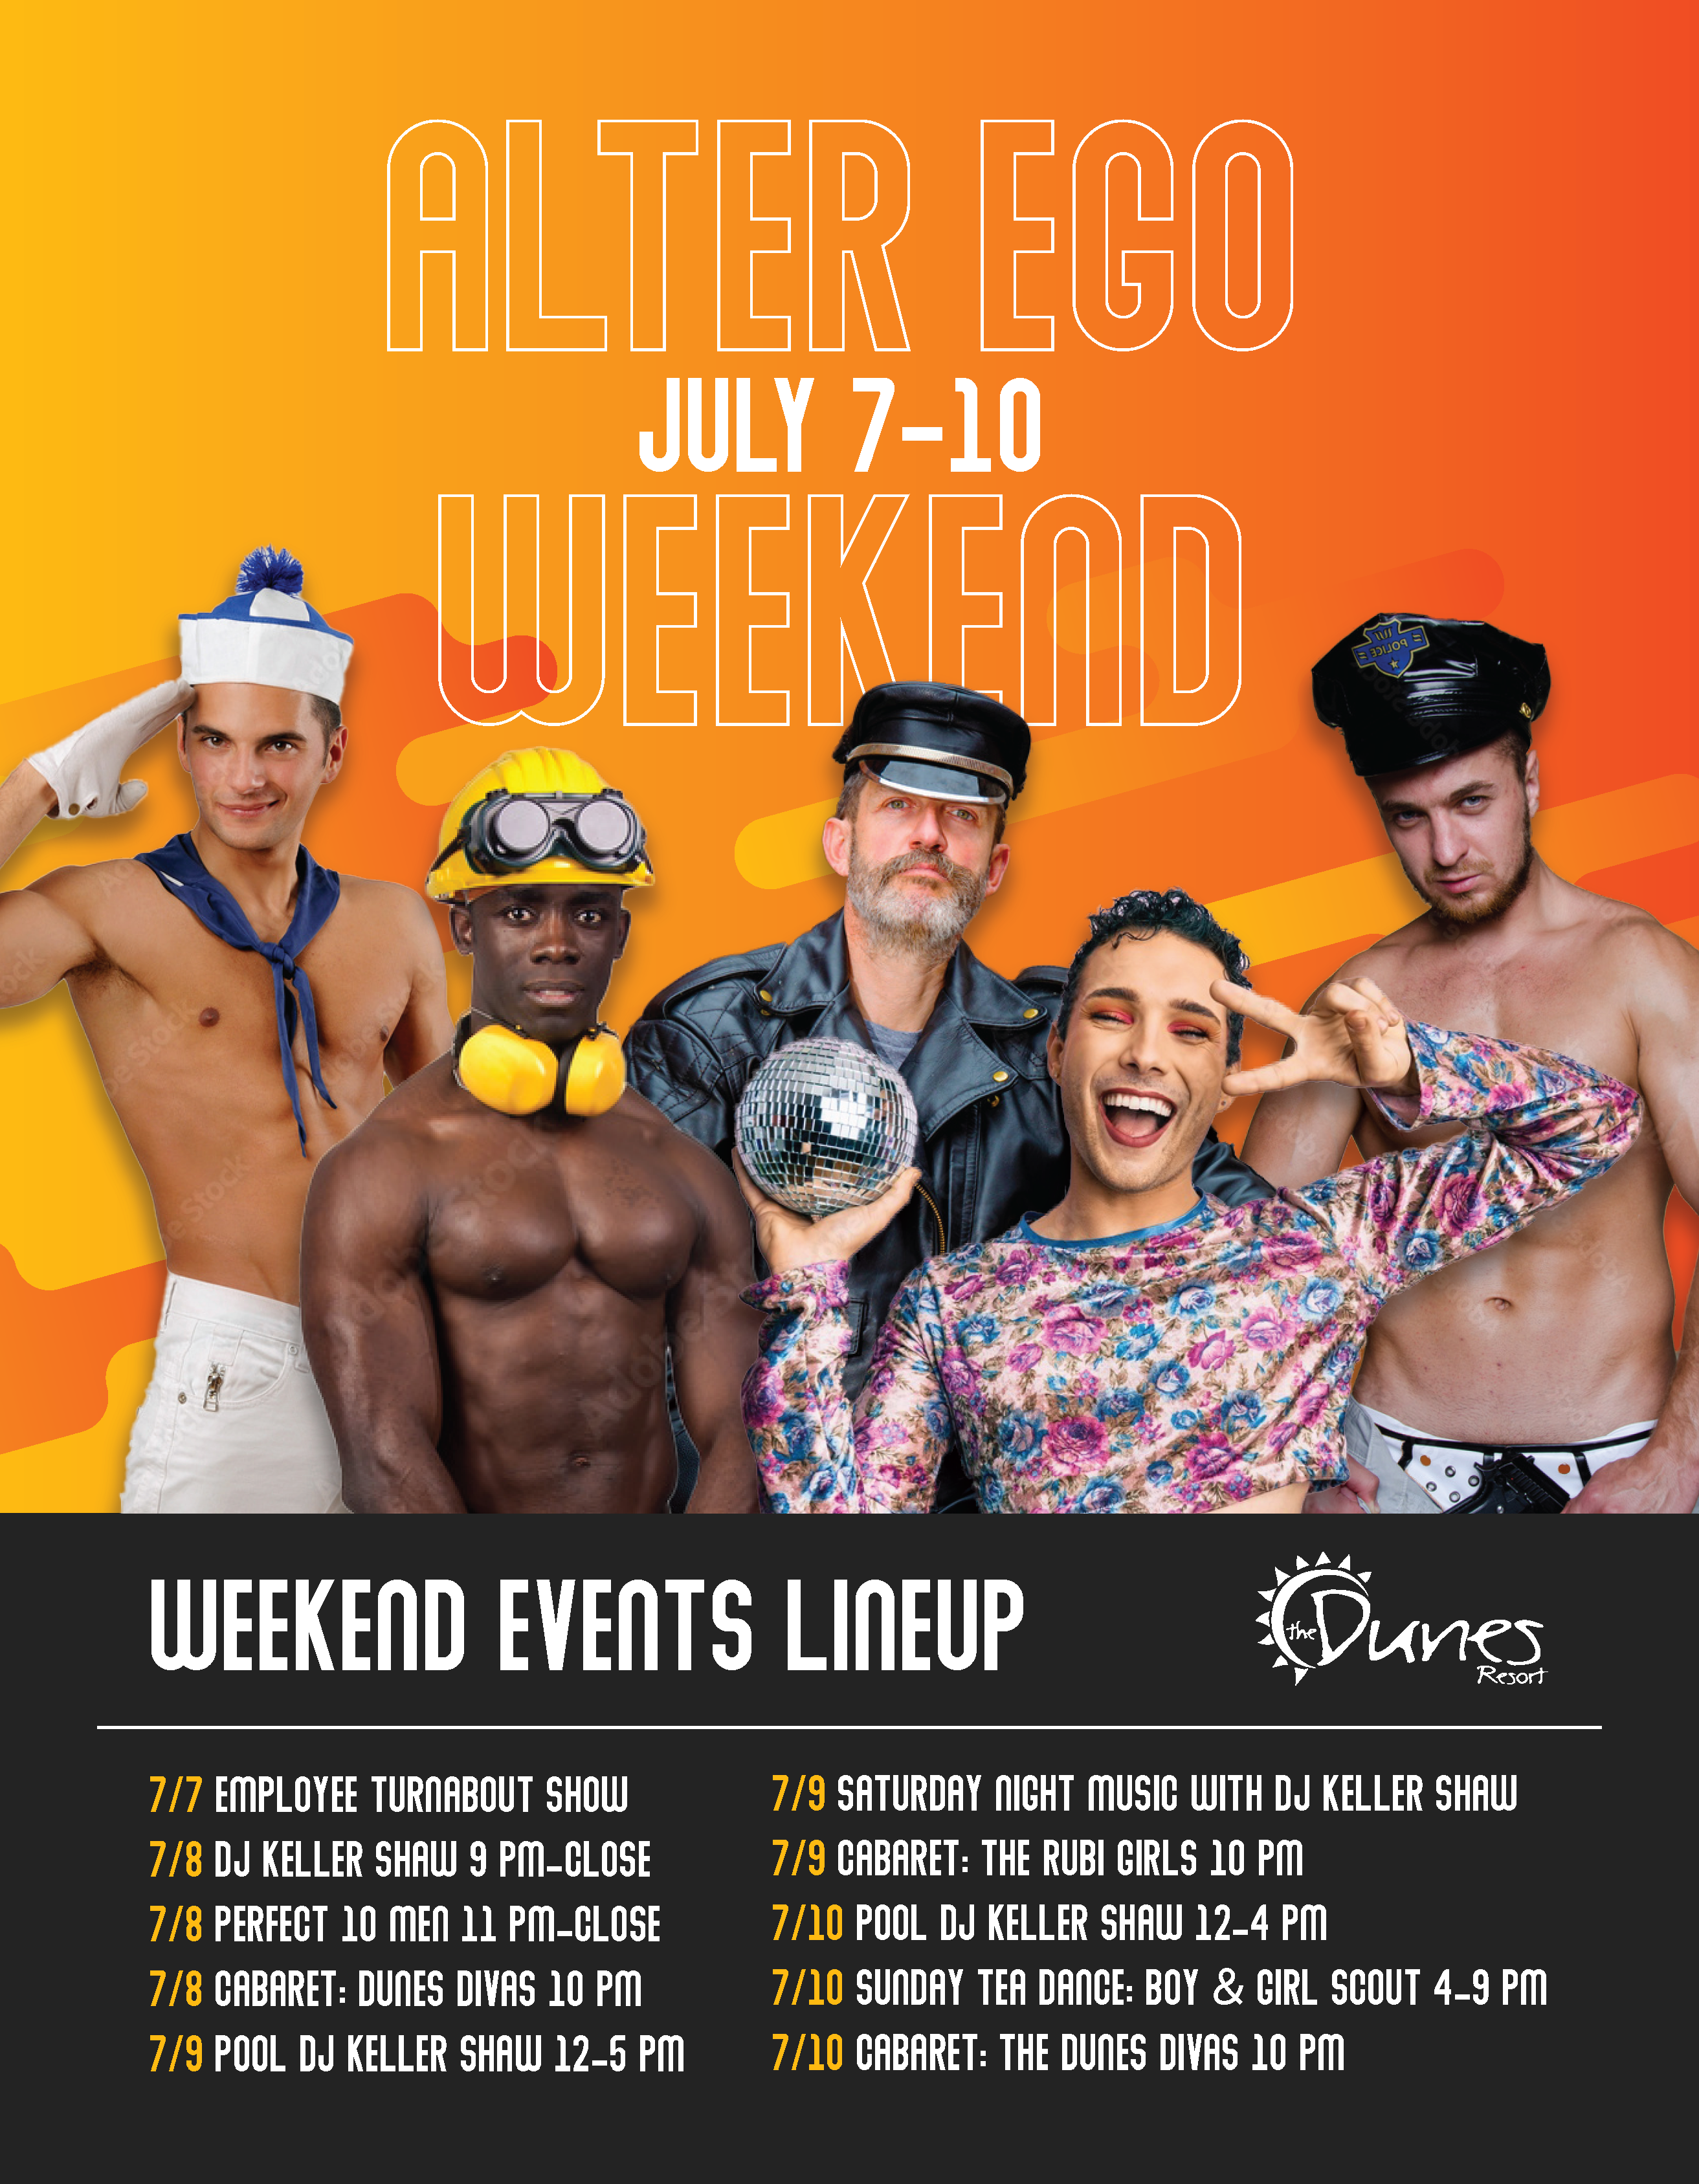 Five men dressed in various costume under the text "Alter Ego Weekend"